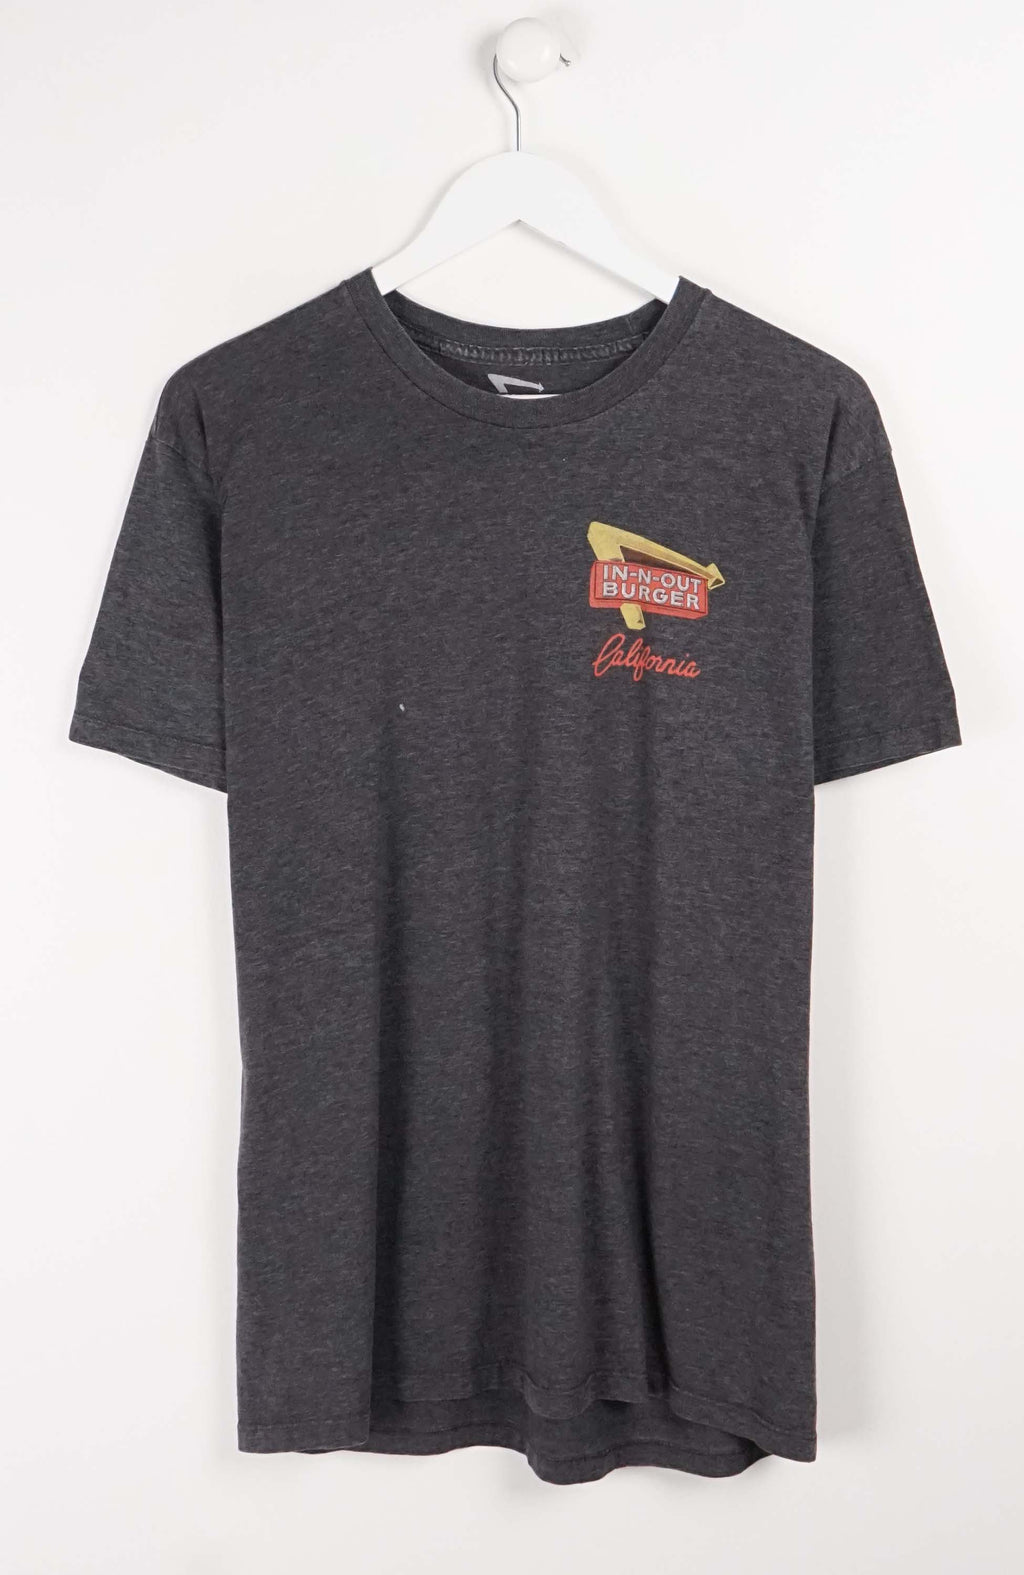 VINTAGE IN-N-OUT T-SHIRT (L)